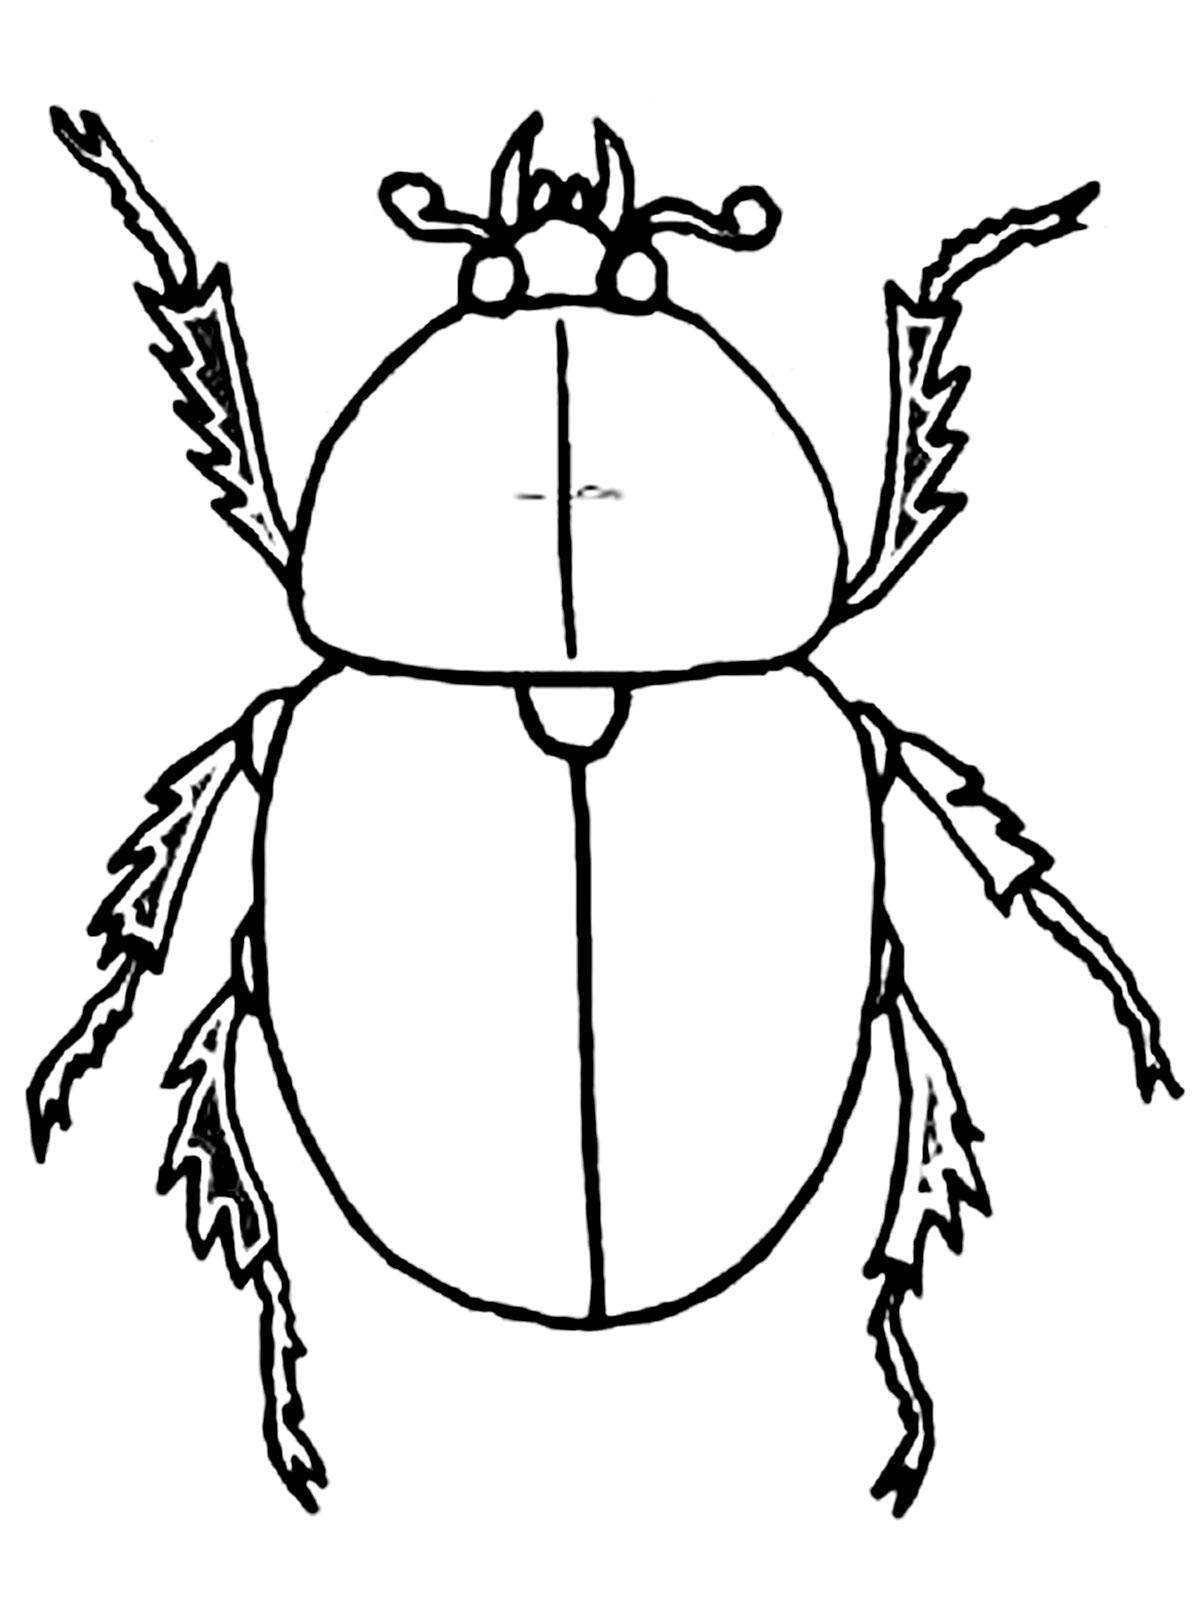 Coloring Beetle. Category Animals. Tags:  beetle.